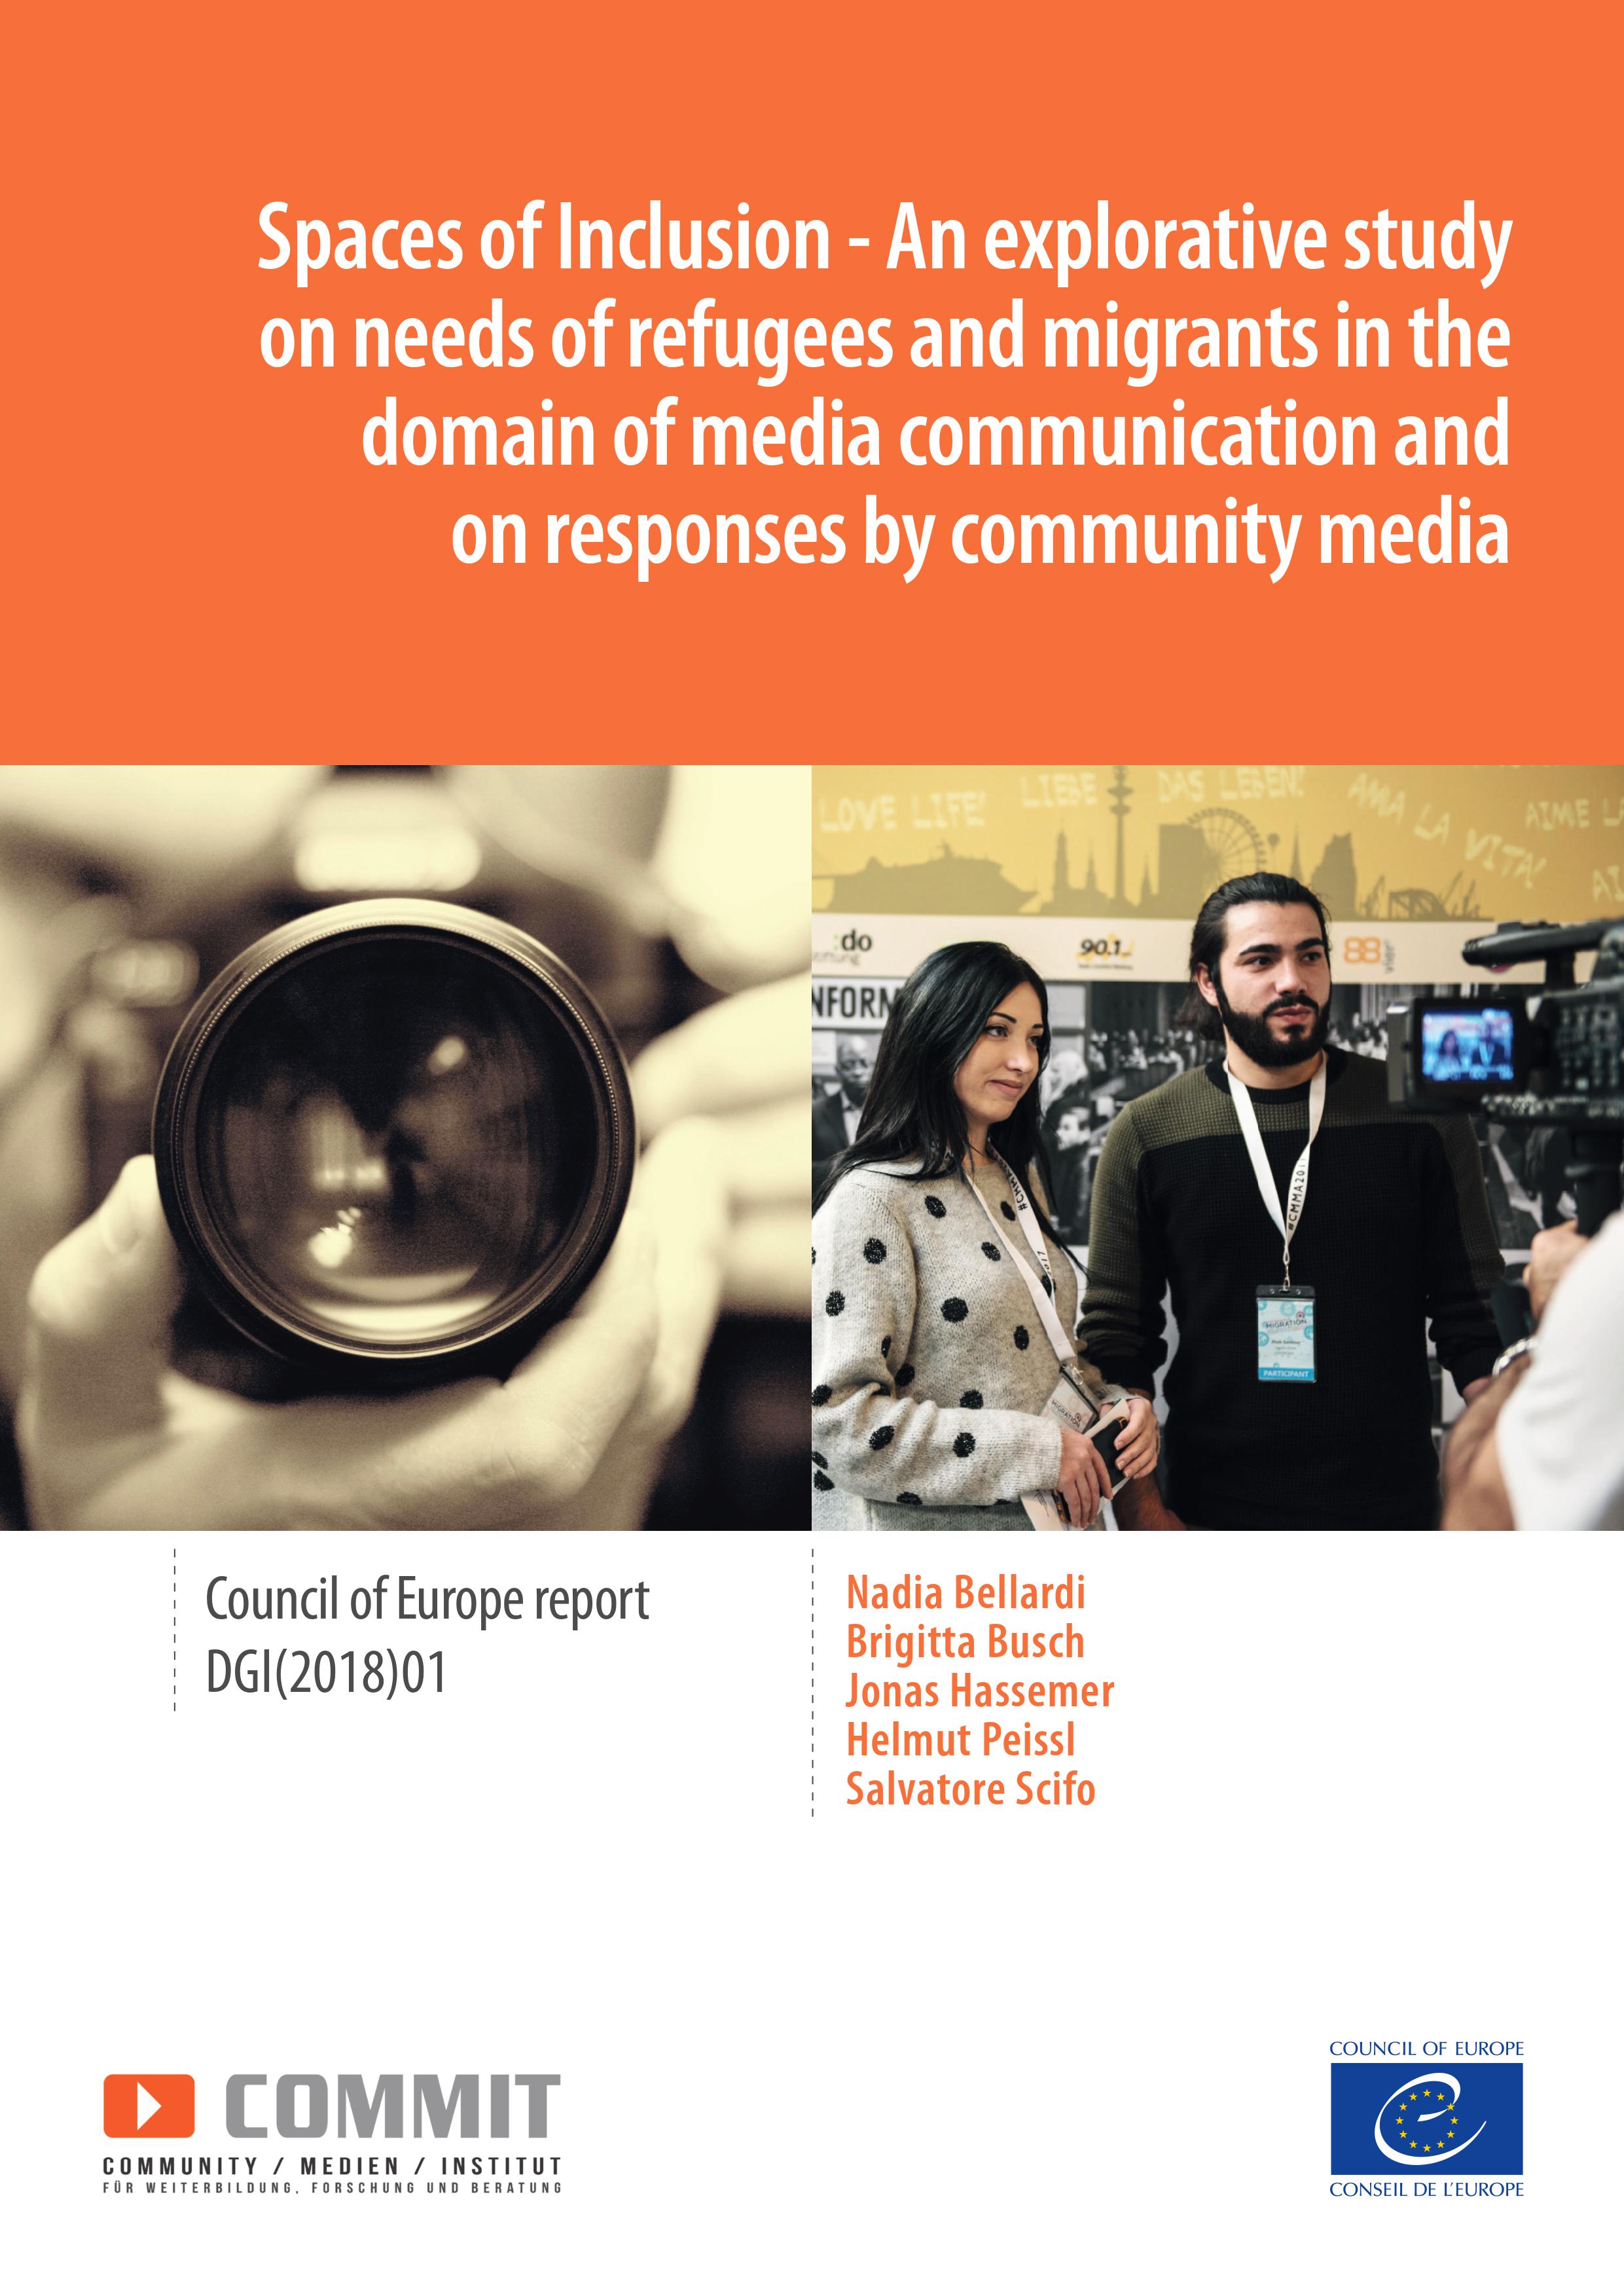 Spaces of Inclusion - An explorative study on needs of refugees and migrants in the domain of media communication and on responses by community media